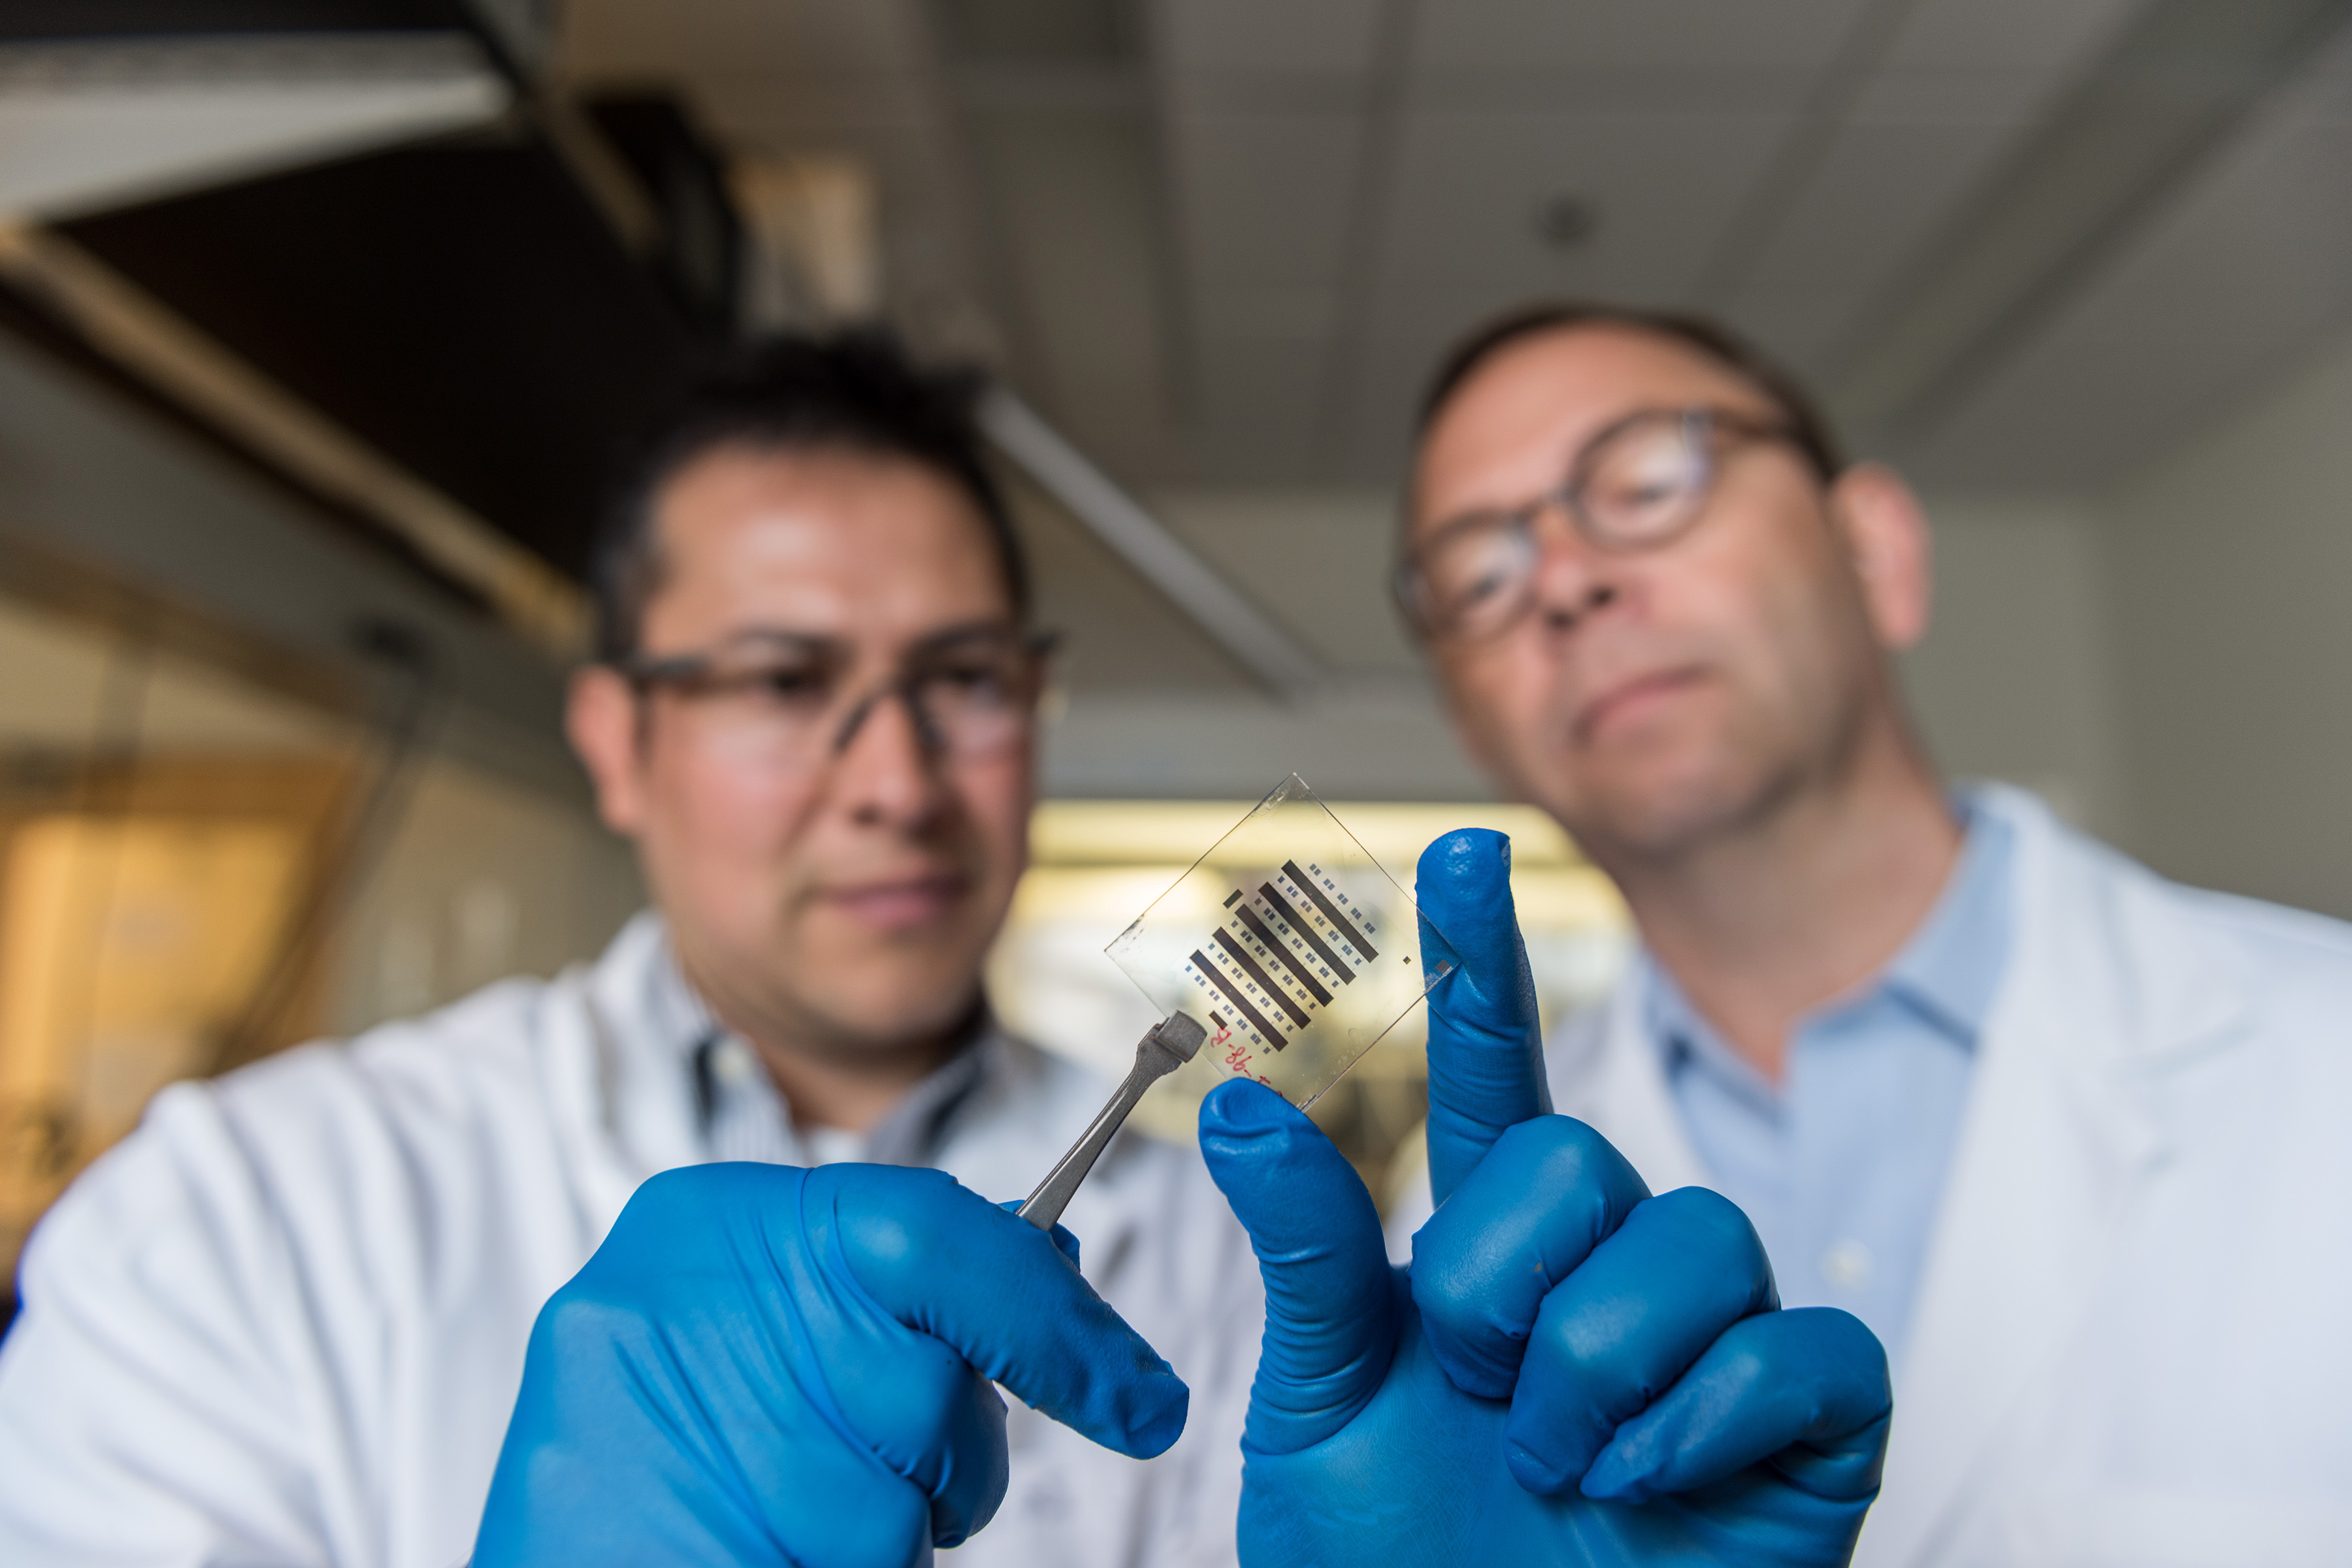 Georgia Tech Senior Research Scientist Canek Fuentes-Hernandez (left) and Professor Bernard Kippelen showing a glass substrate with thin-film transistors. Source: Georgia Institute of Technology